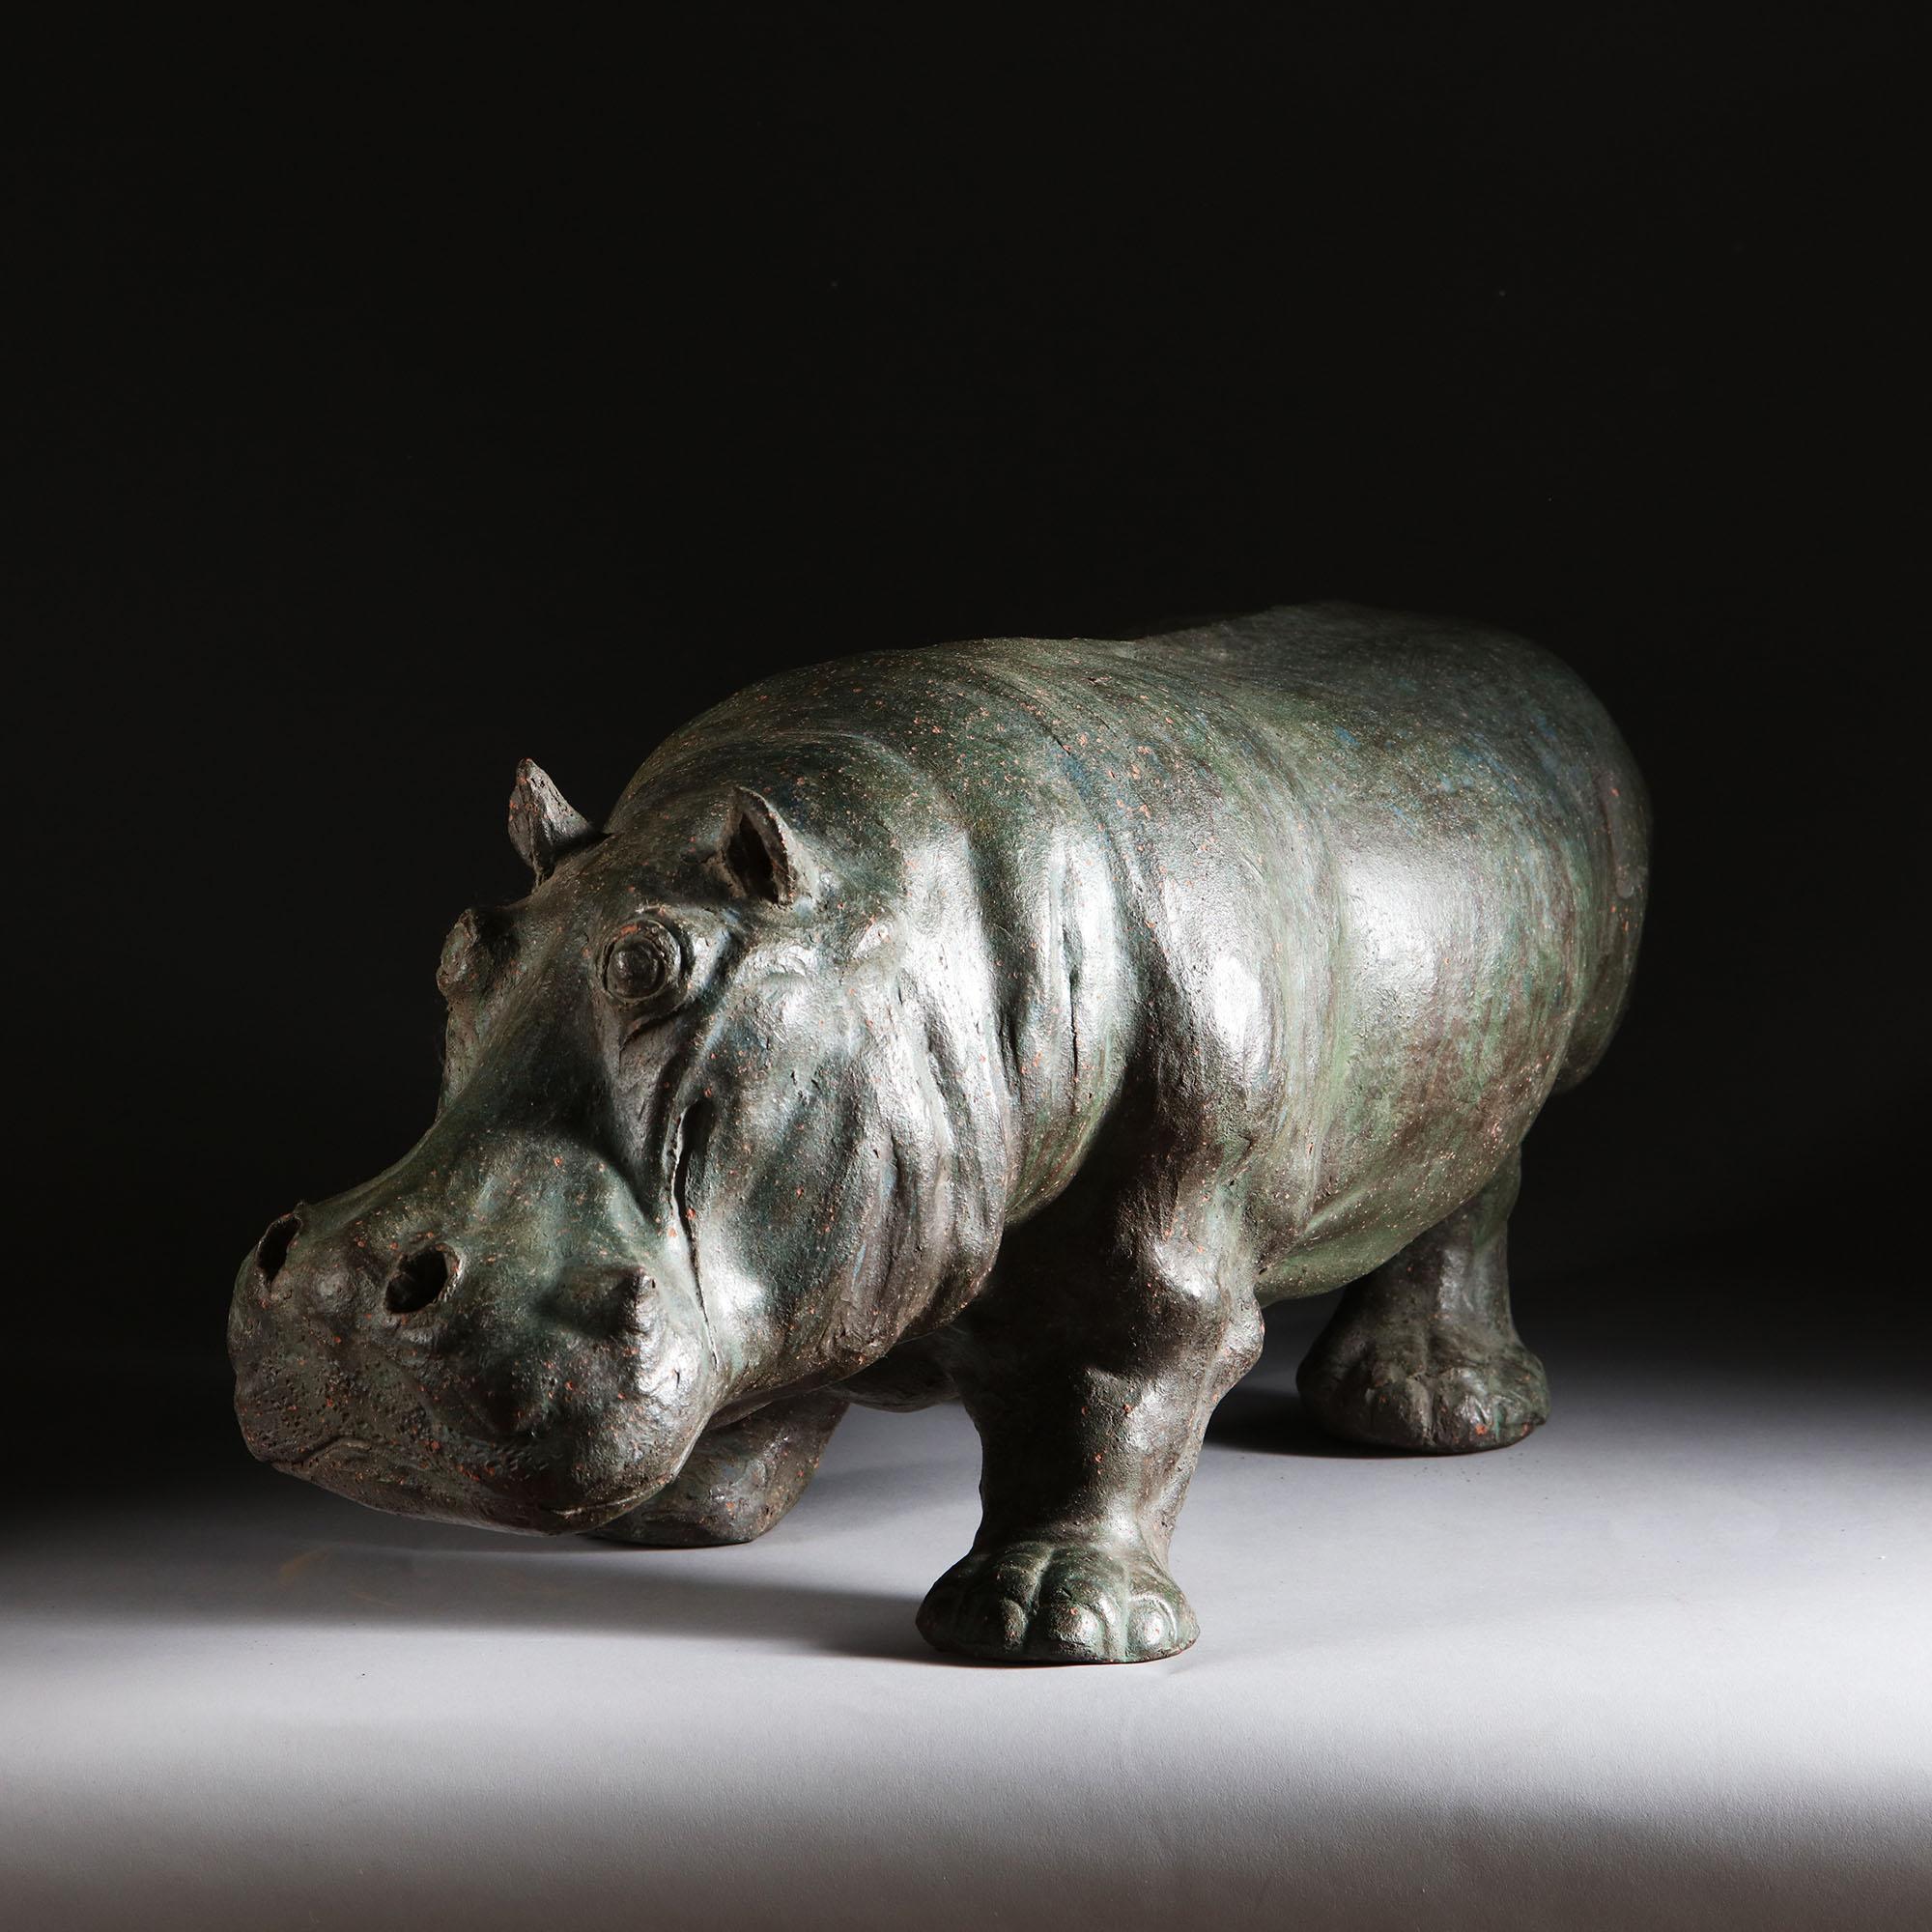 A late 19th century Chinese terracotta model of a hippopotamus, patinated to simulate bronze.